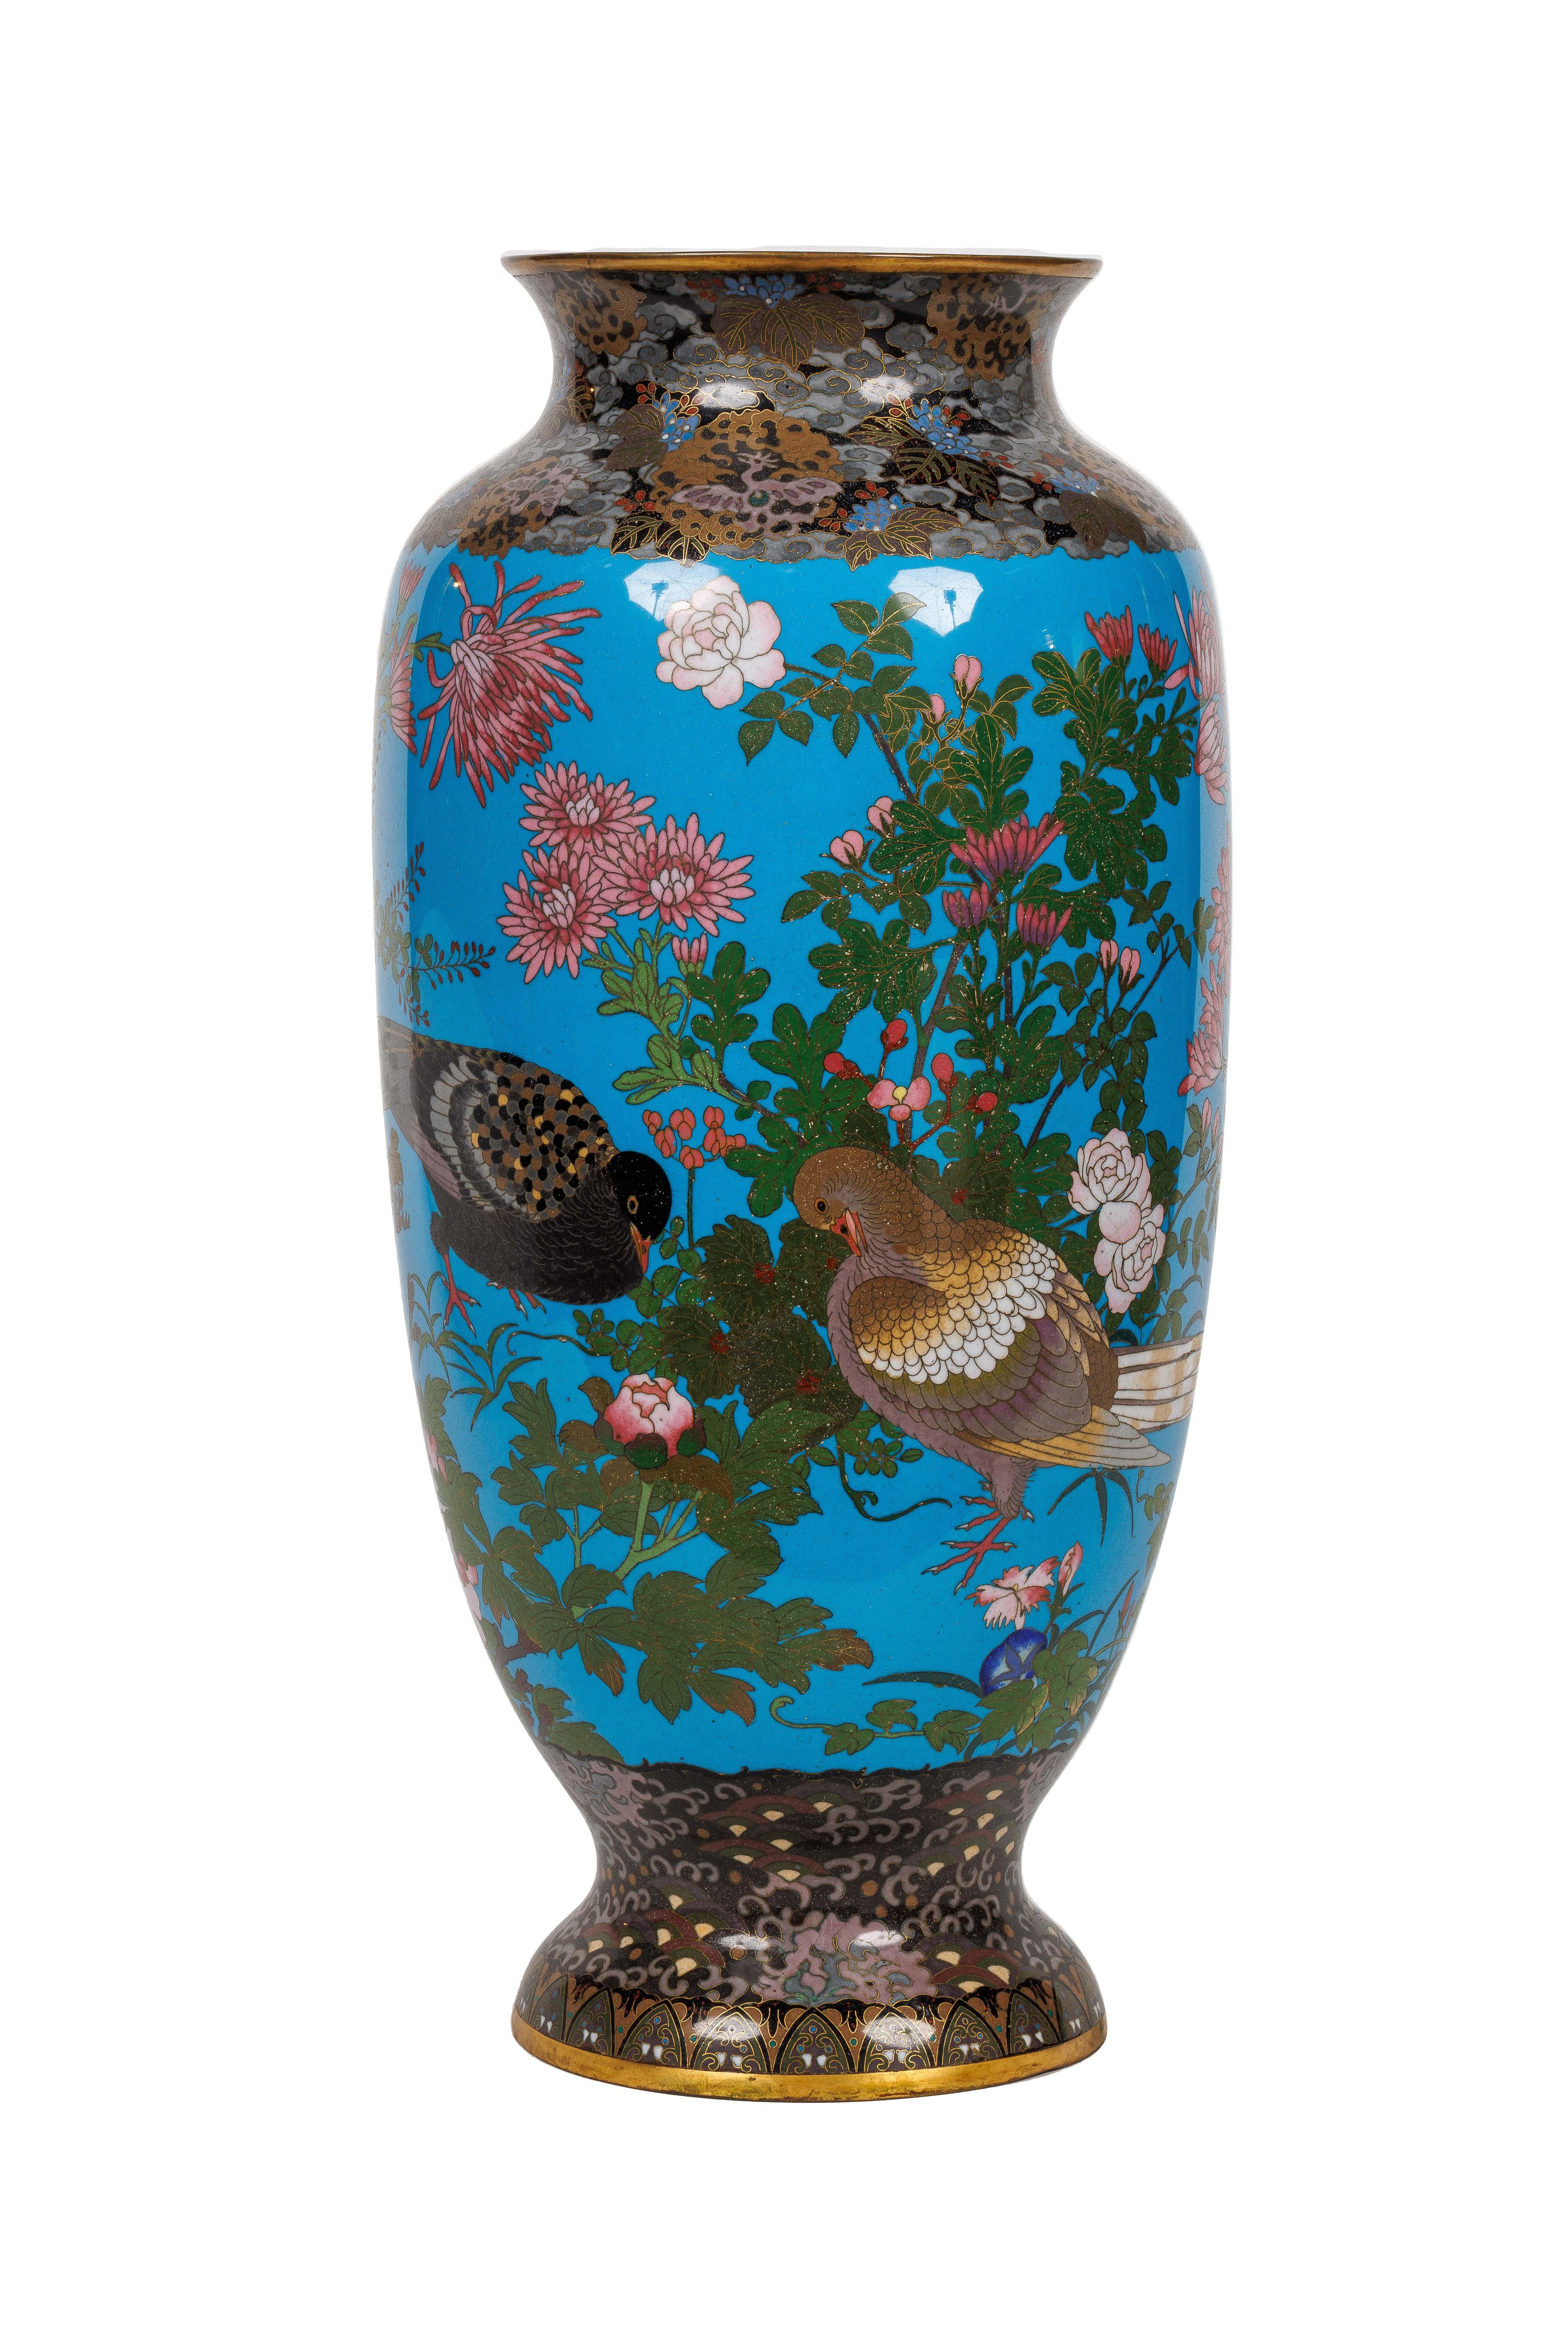 A large pair of Meiji Period Japanese cloisonne enamel vases attributed to Goto Seizaburo, 19th century.

These vases were made during the Meiji period (1868-1912) in Japan and are characterized by their blue enamel background with intricate